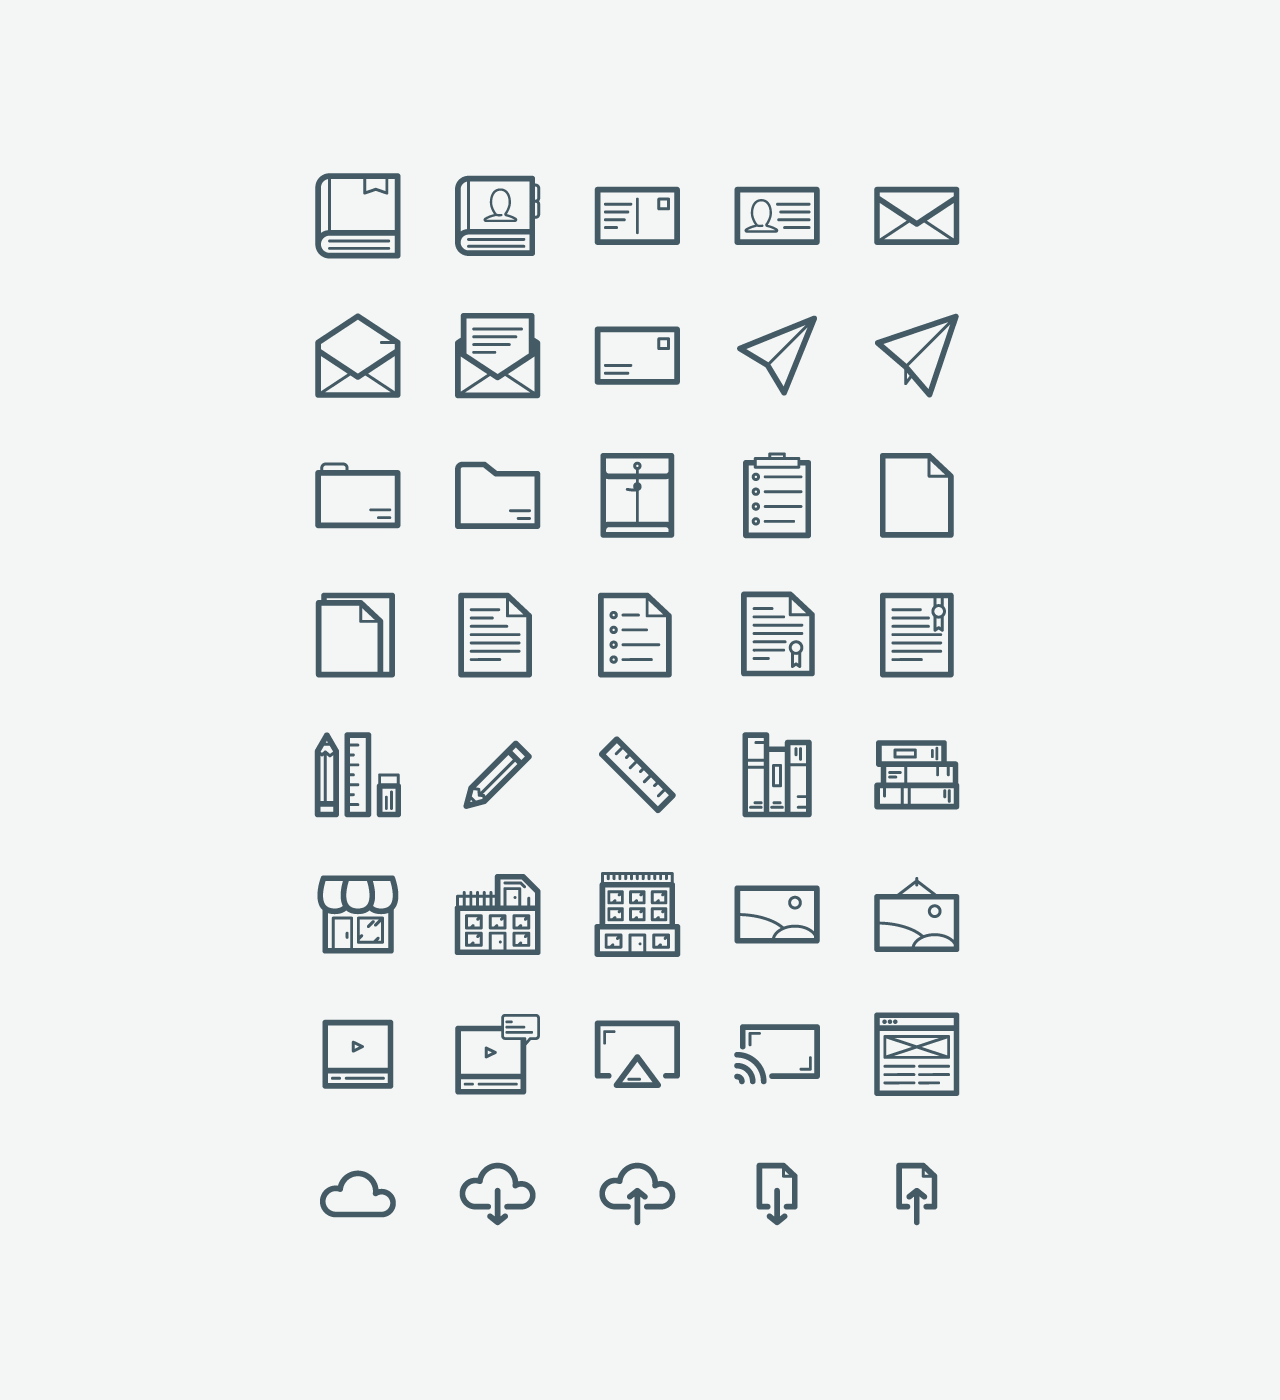 tylerbrooksdesigns icons small selection of icons